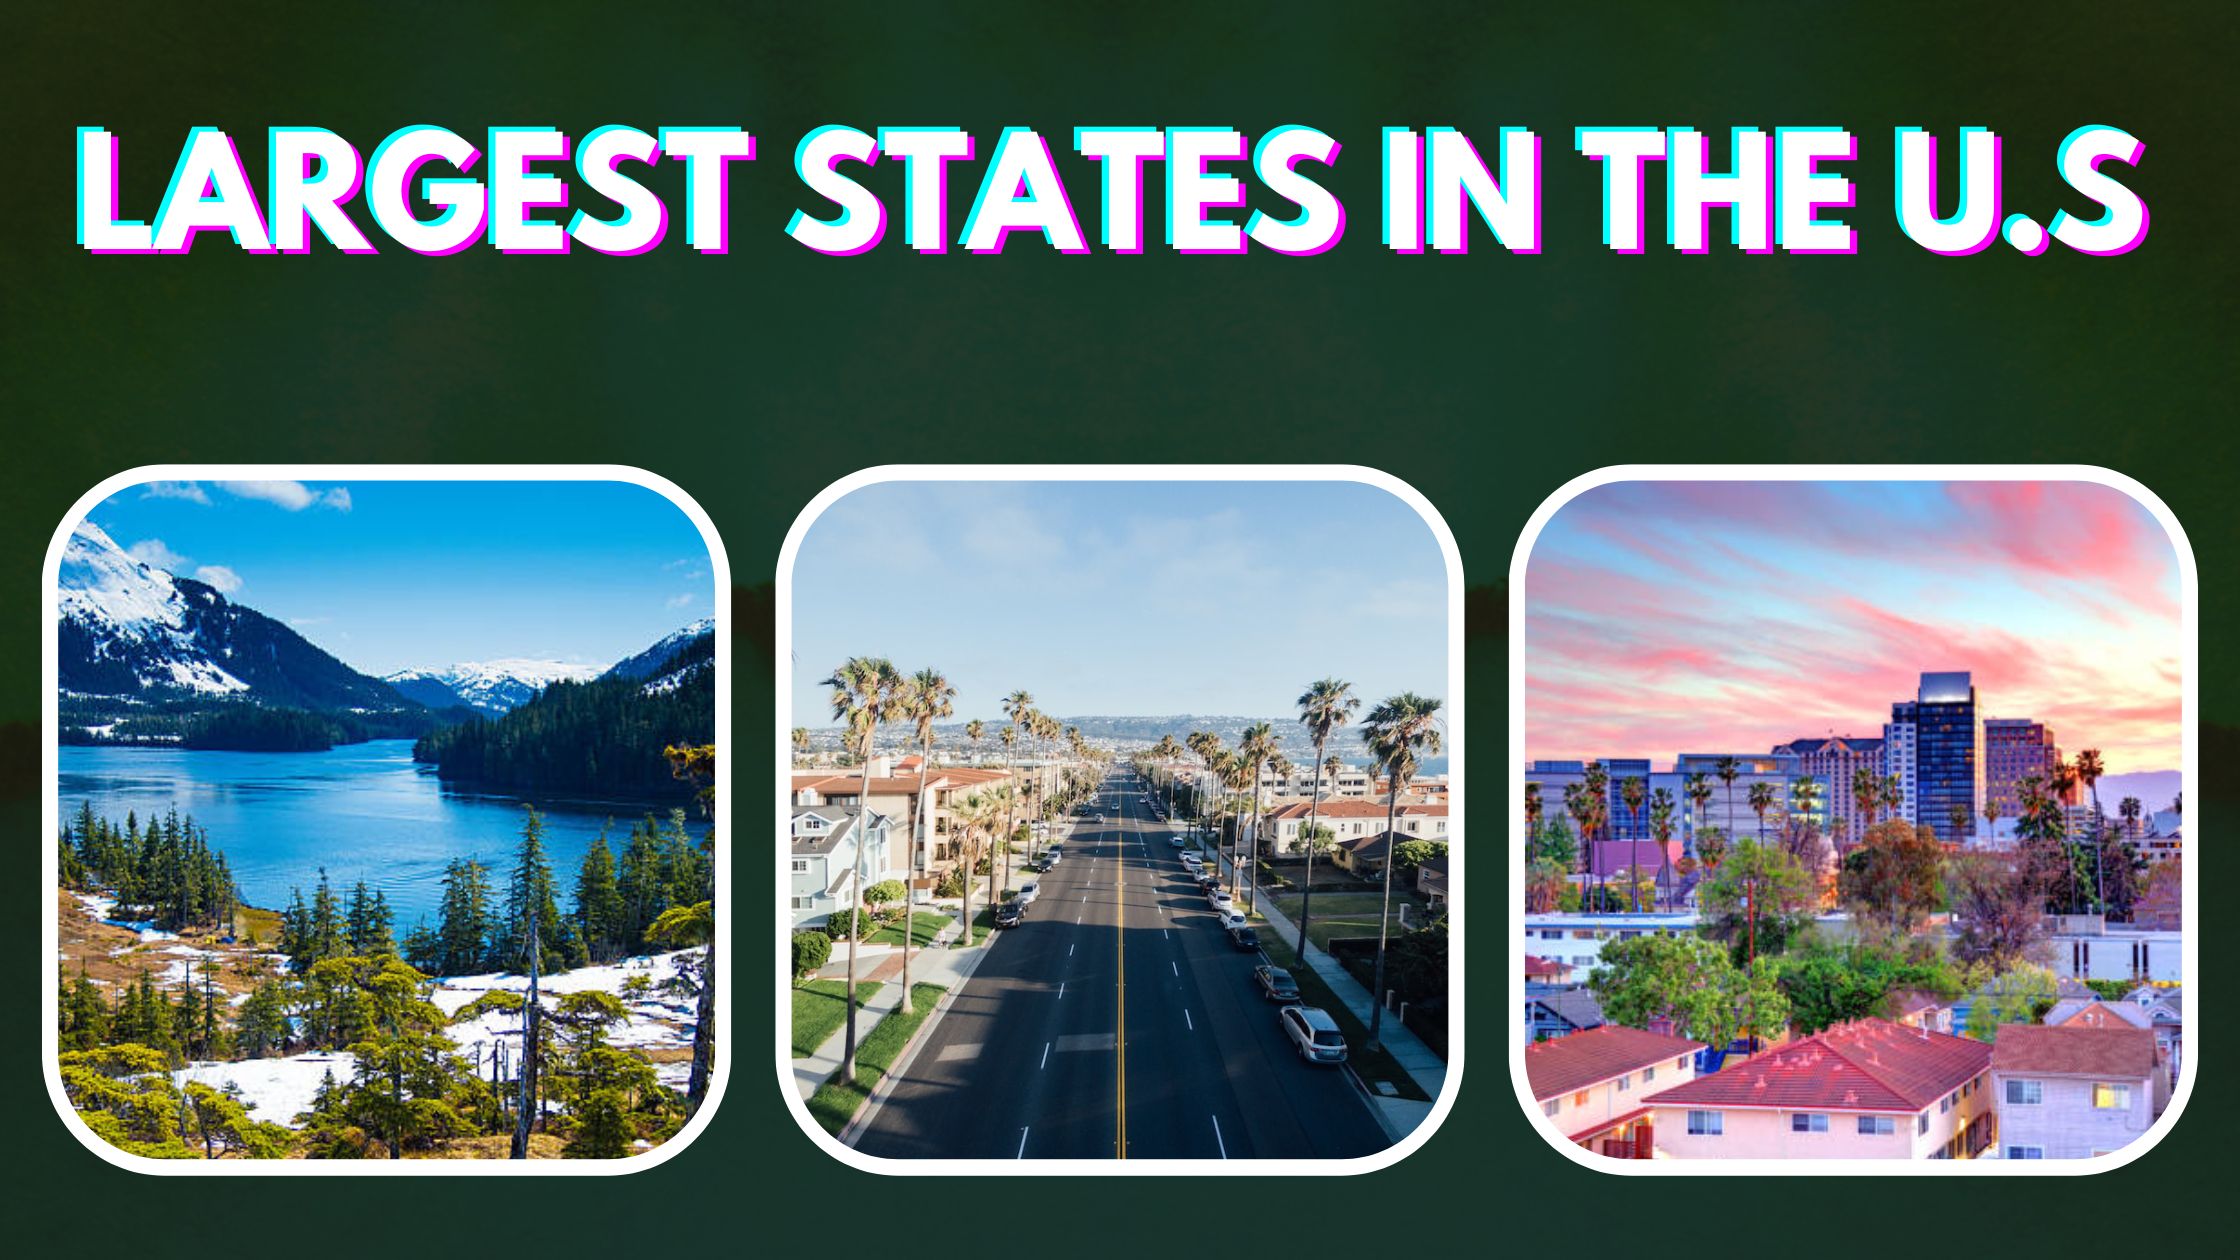 Largest States in the U.S